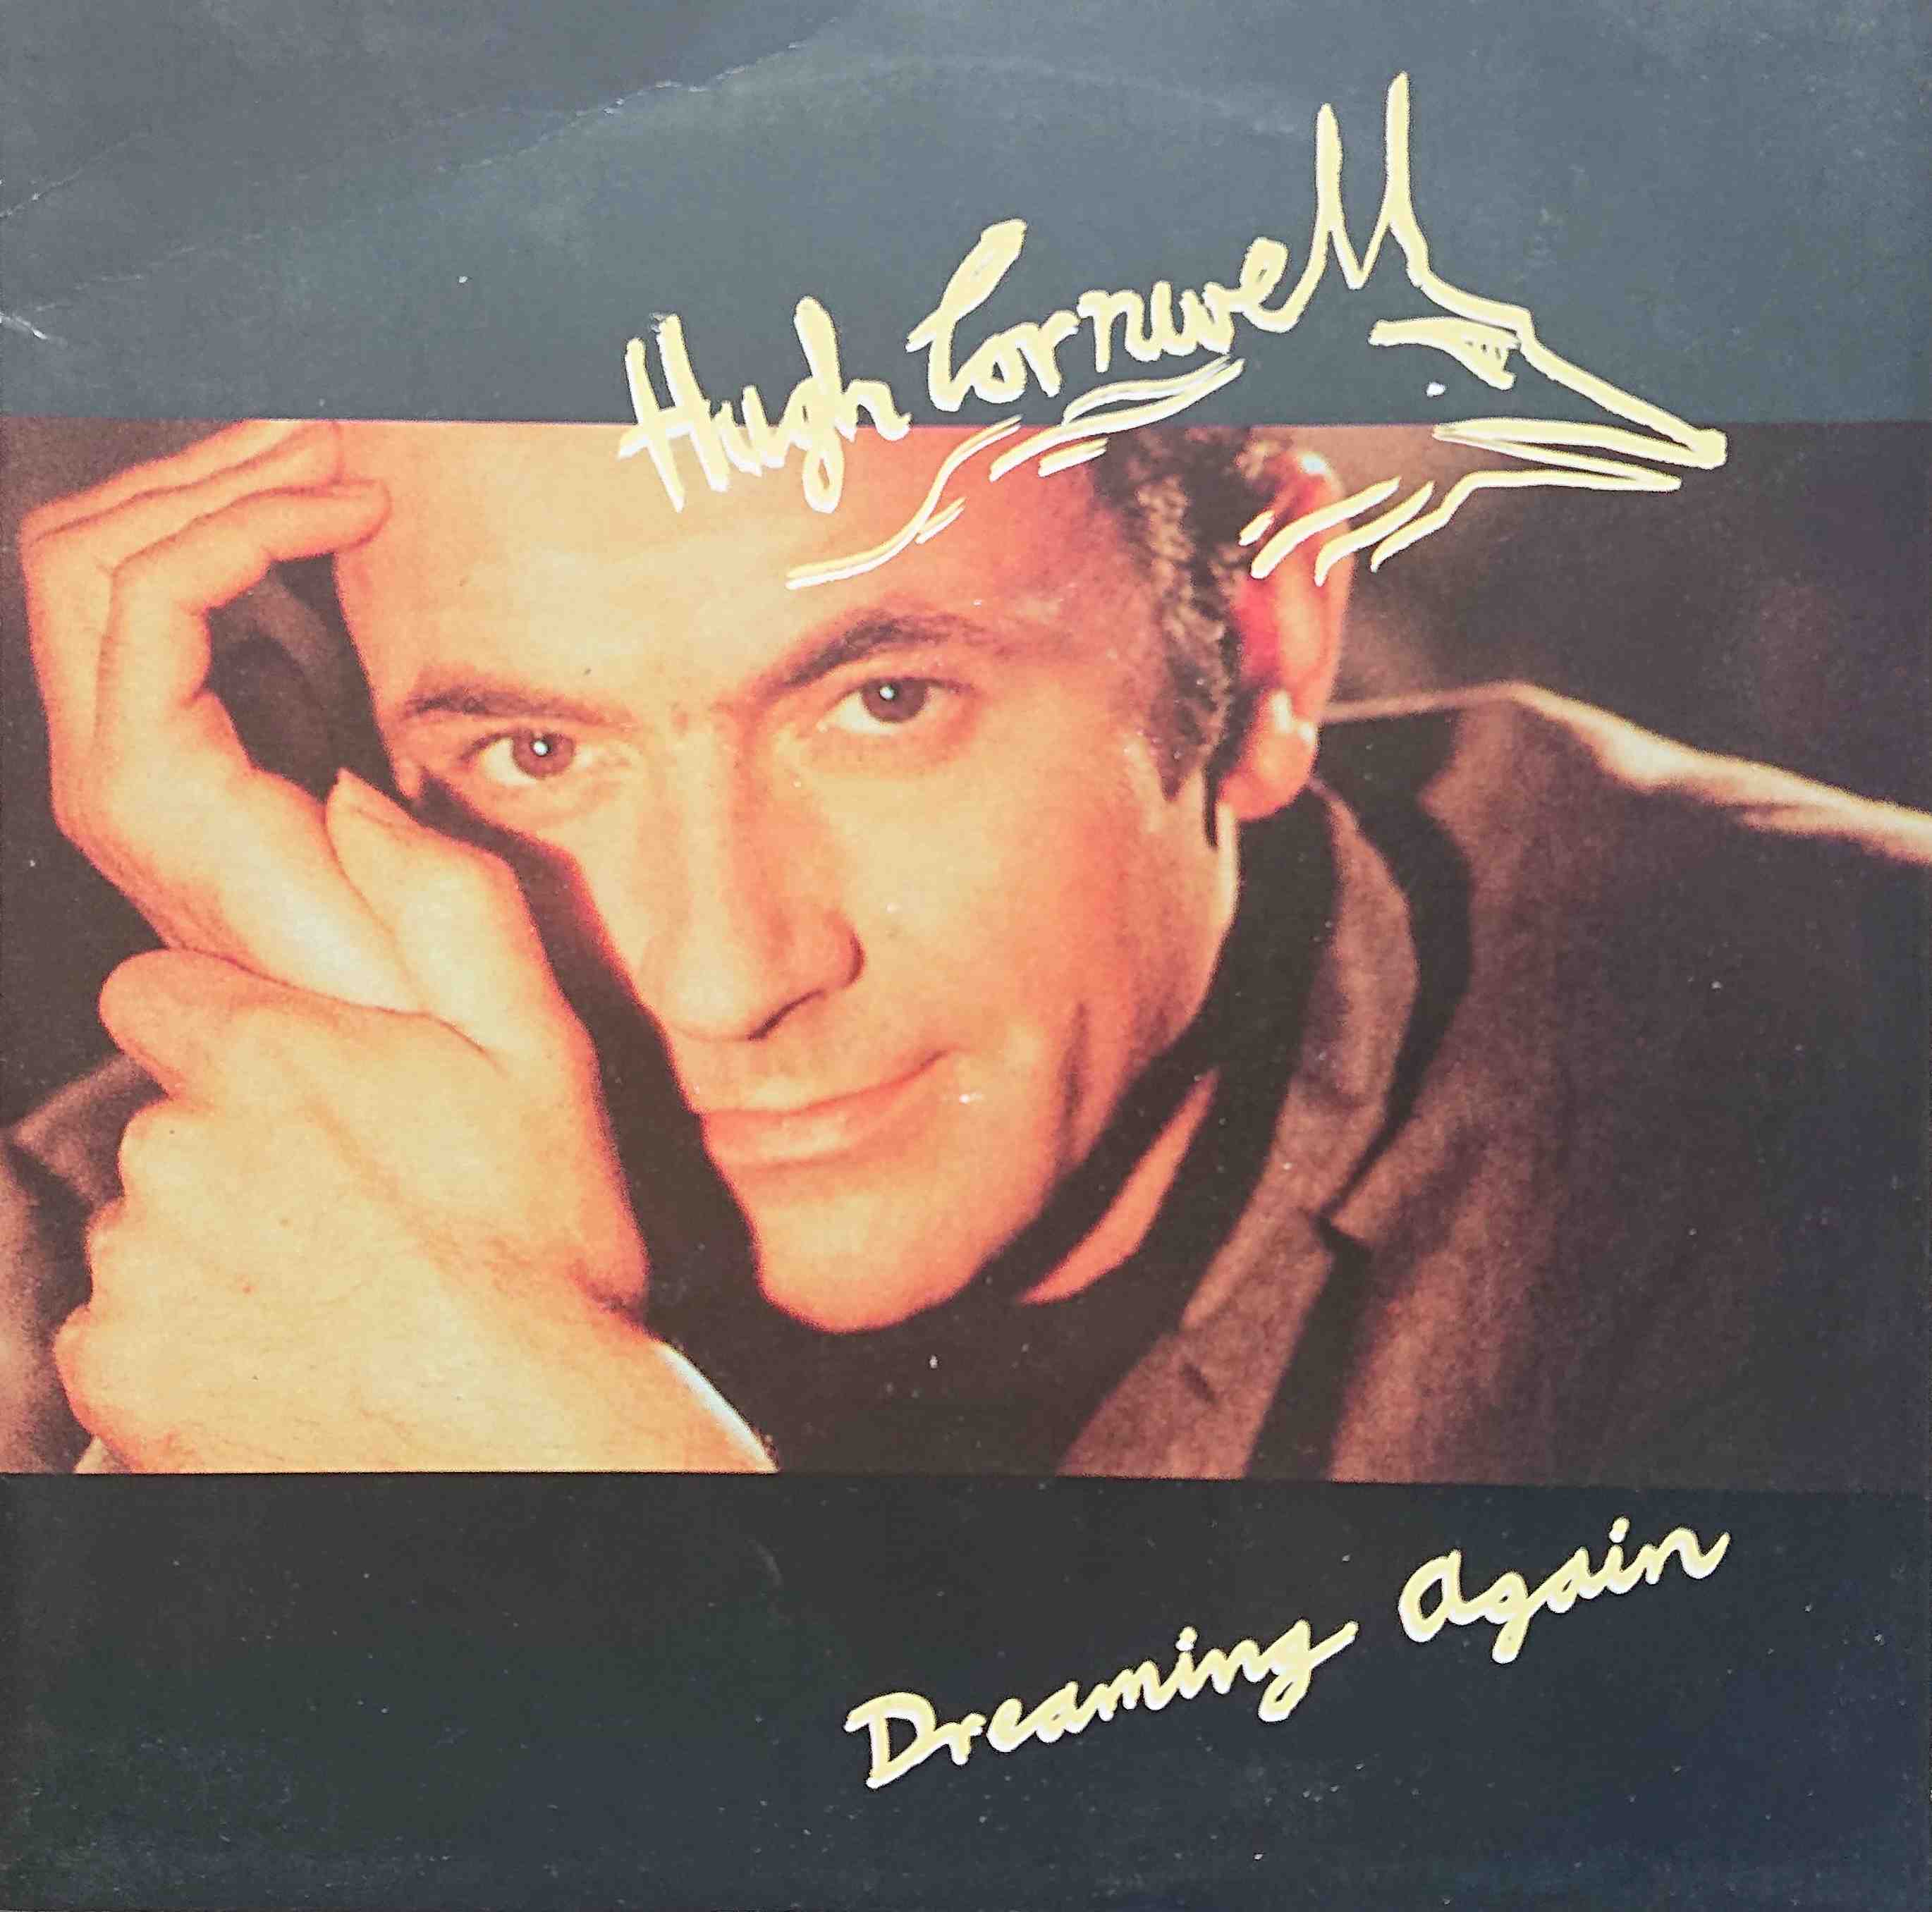 Picture of Dreaming again by artist Hugh Cornwell from The Stranglers singles